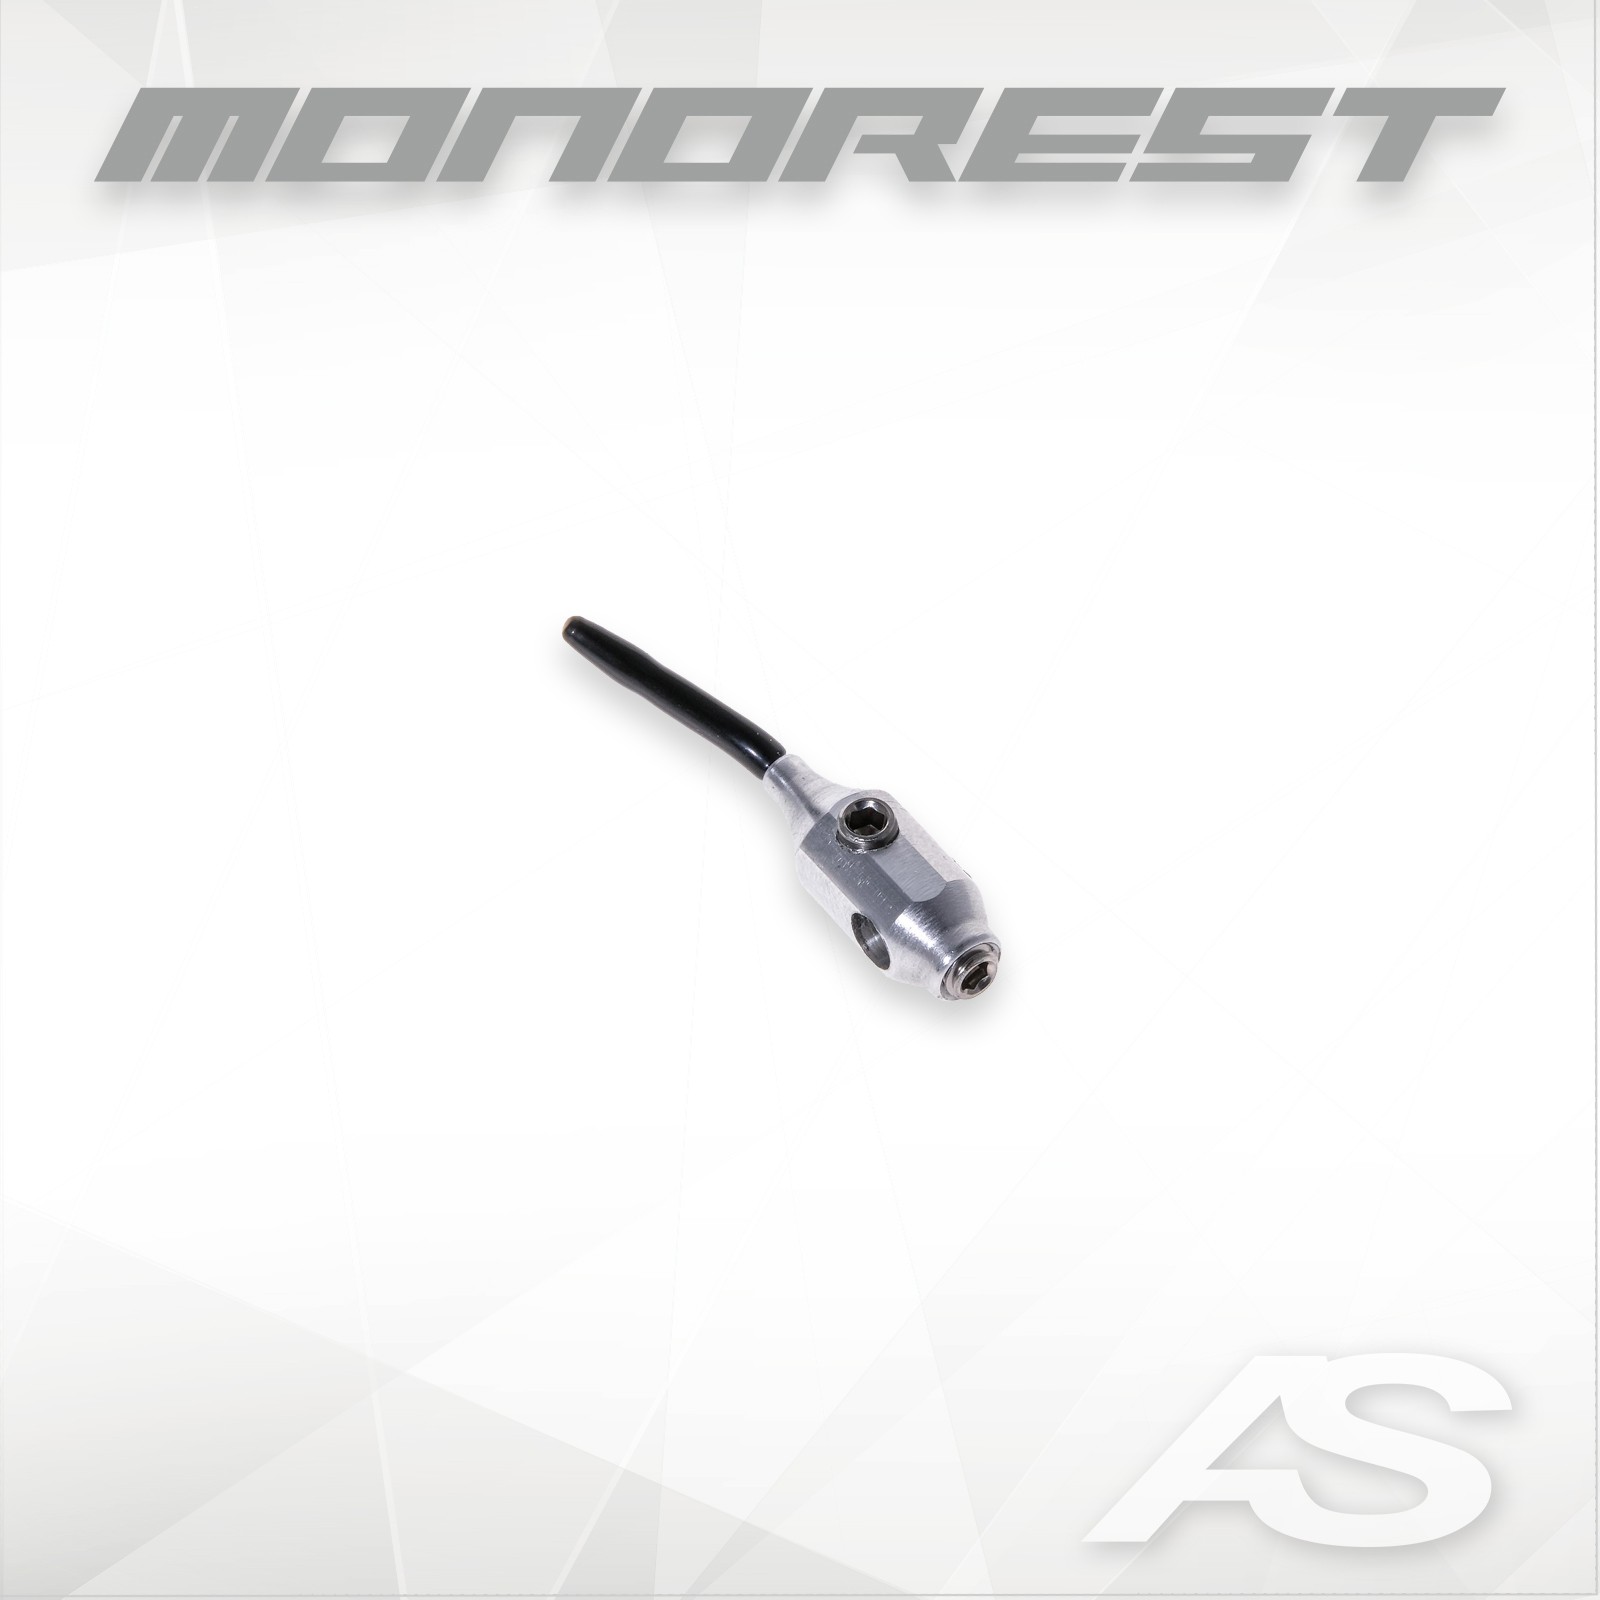 GRIFFE MONOREST